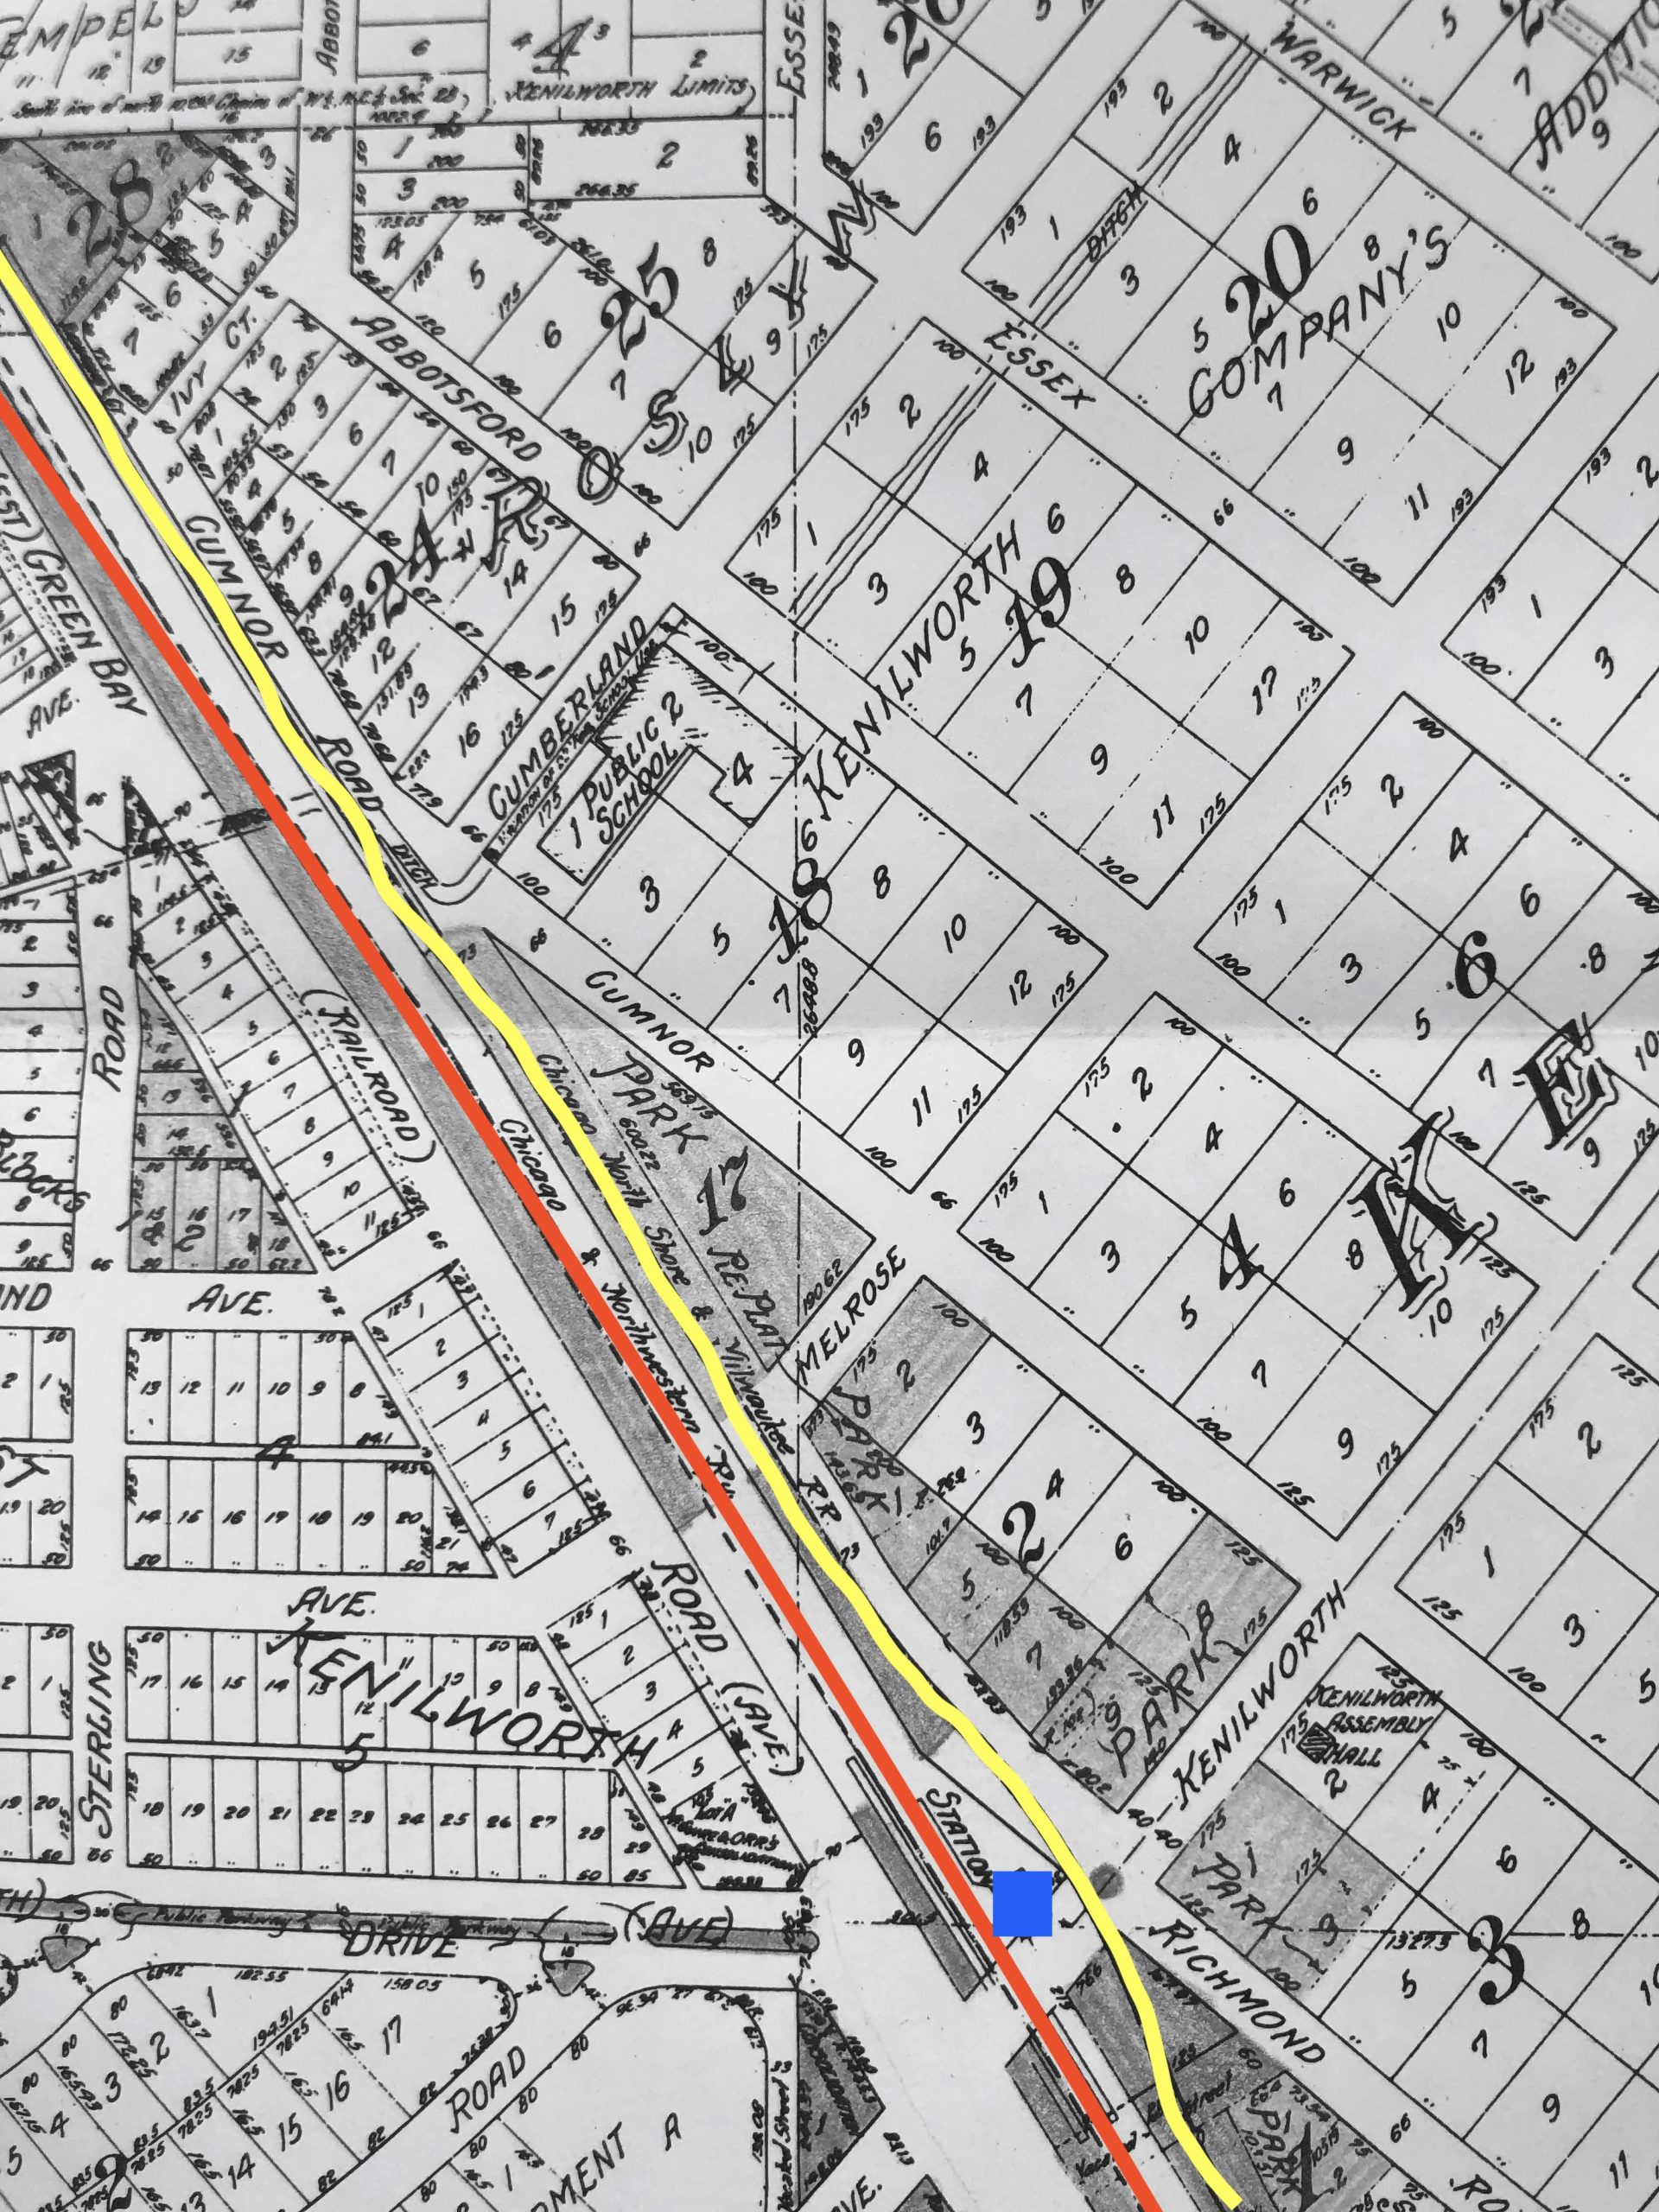 Map of Kenilworth. The yellow line follows the North Shore Line (notice that it bends around Kenilworth Station - in blue); the red line follows today's Union Pacific/North Line.